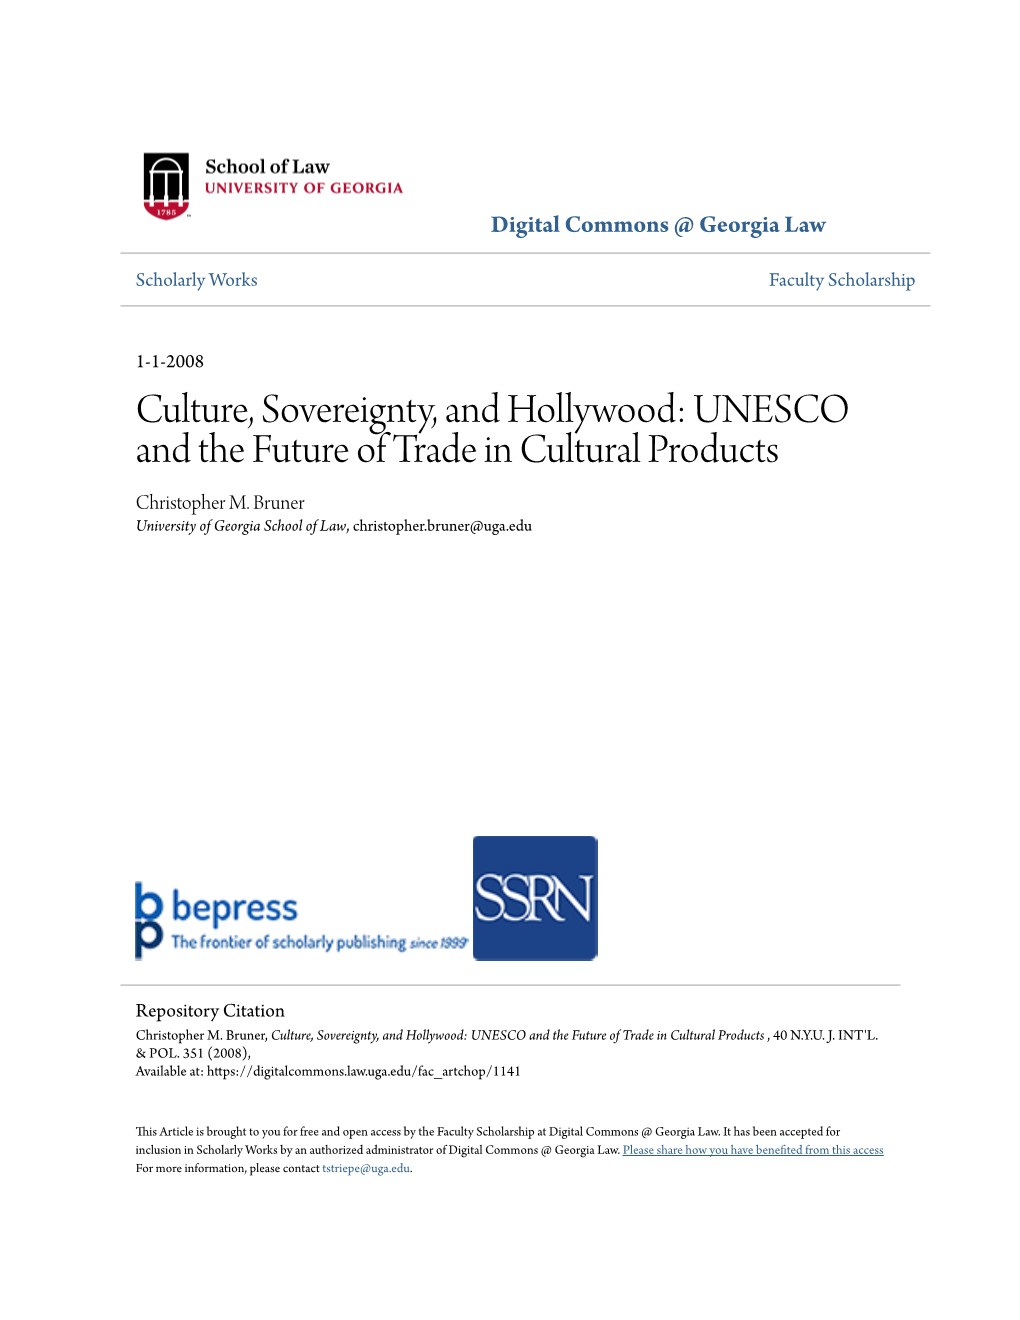 Culture, Sovereignty, and Hollywood: UNESCO and the Future of Trade in Cultural Products Christopher M